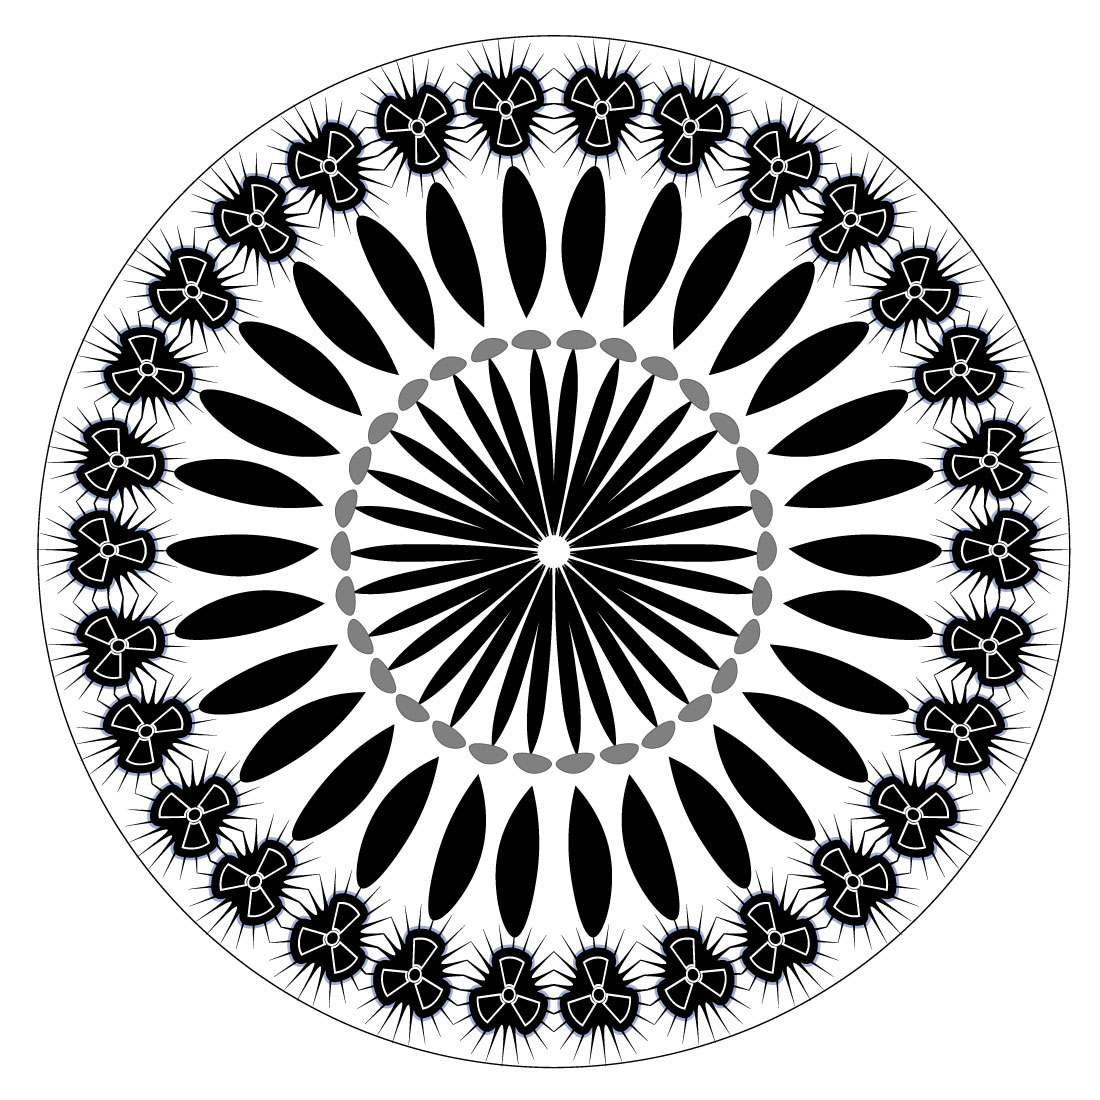 Mandala-Art-with-Radiation-in-black-and-white preview image.